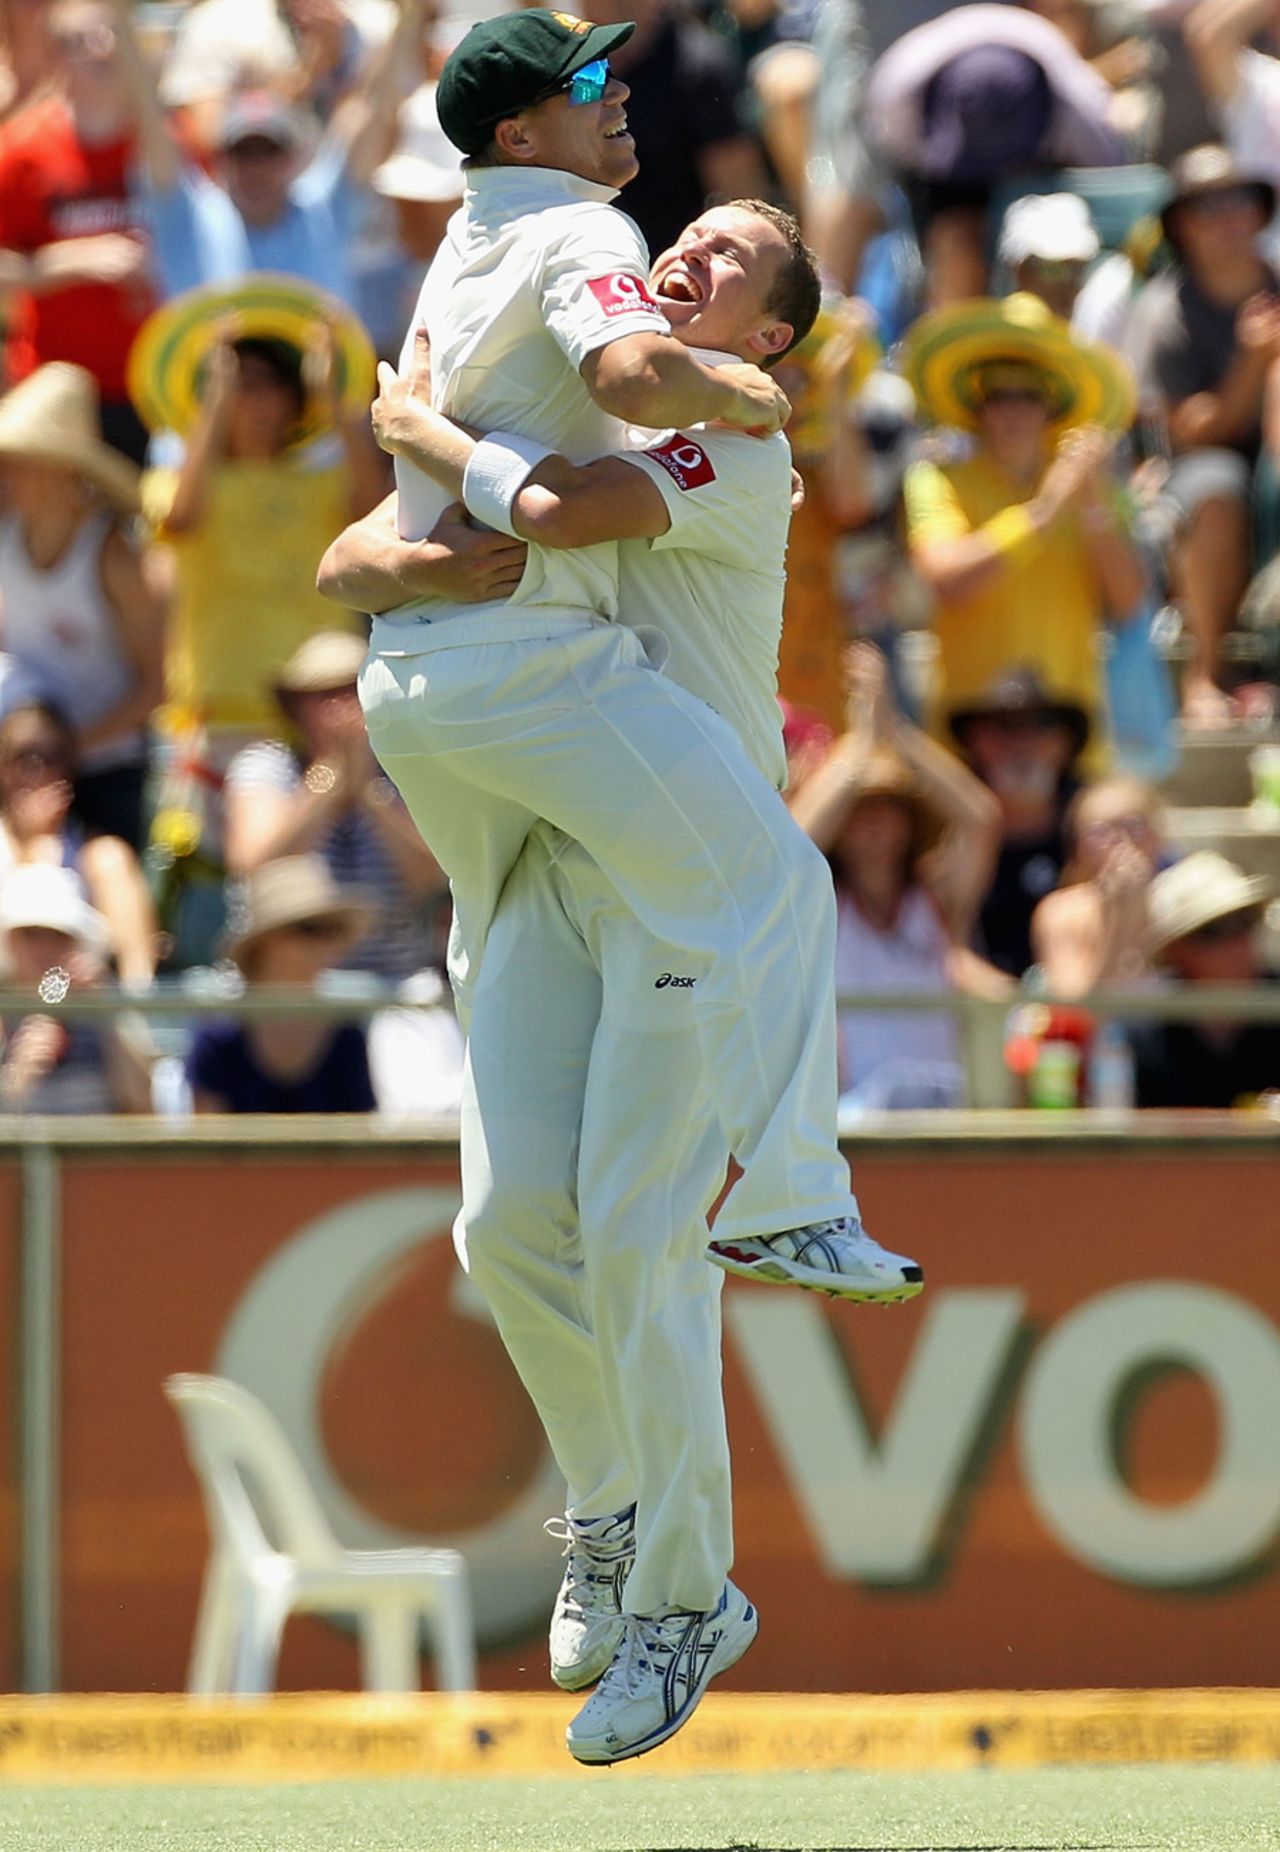 David Warner and Peter Siddle celebrate Australia's win, Australia v India, 3rd Test, Perth, 3rd day, January 15, 2012